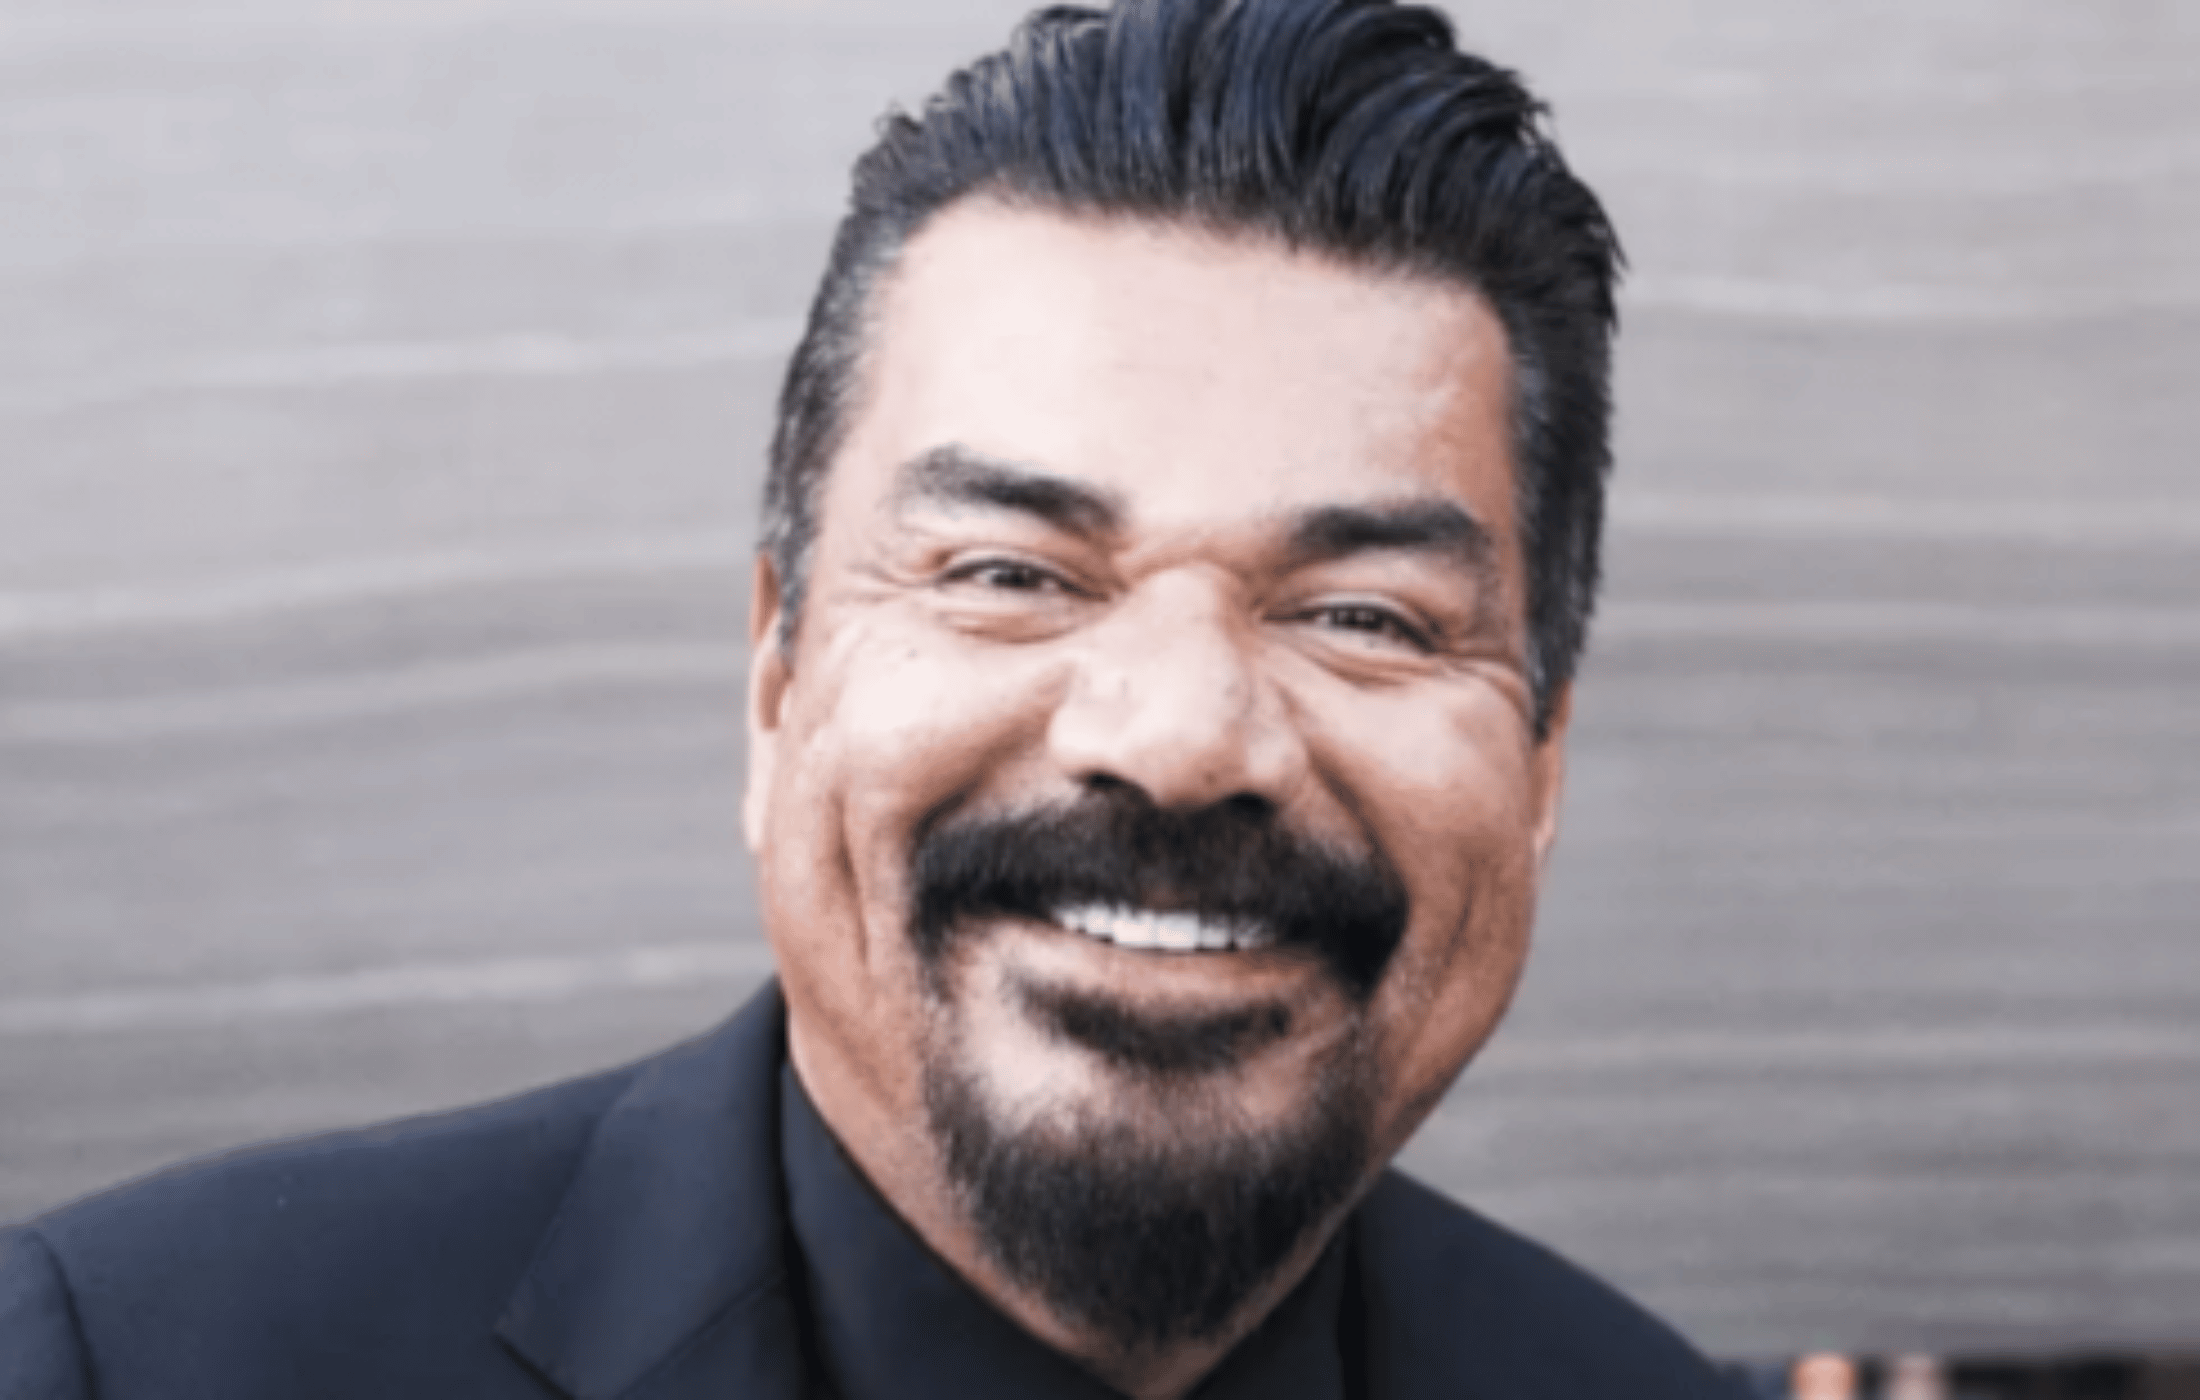 Who is George Lopez's? George Lopez's Net Worth